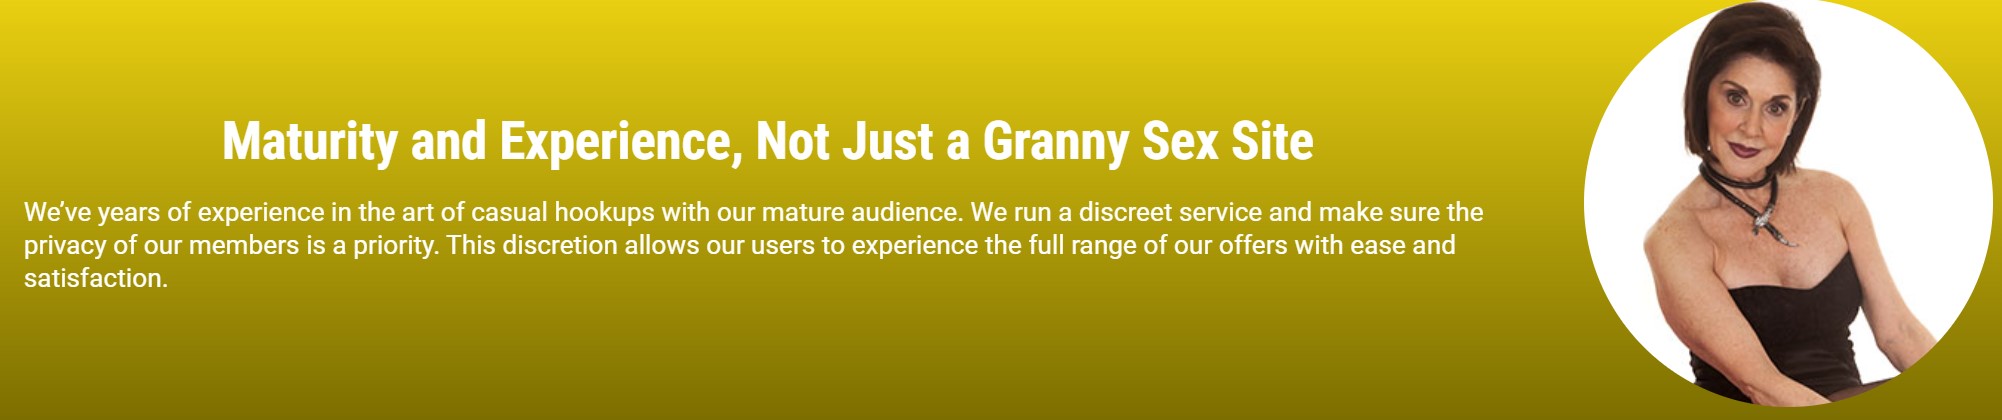 Sex With Grannies